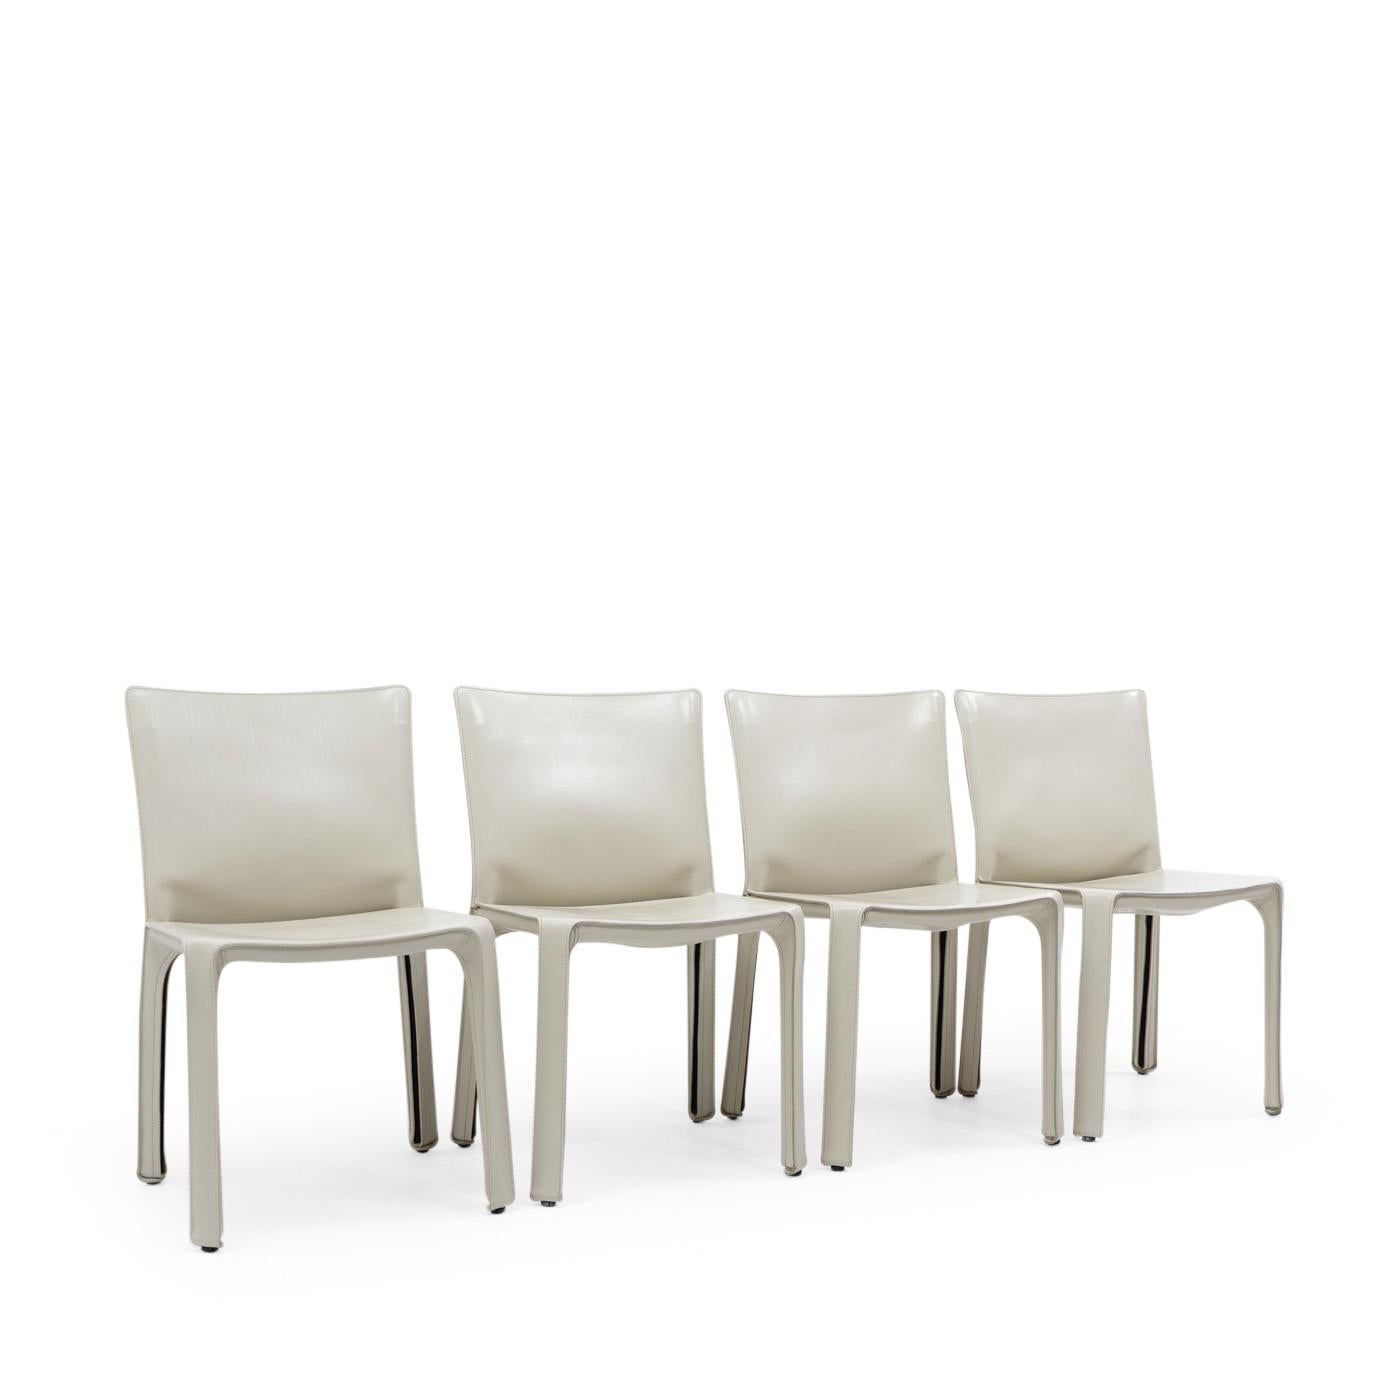 Set of four Cab 412 side chairs in cream-coloured leather by Mario Bellini for Cassina.

The Cab chair is built up as a tubular frame over which thick saddle leather is fitted; the leather skin is kept in place with zippers on the inside legs.

A